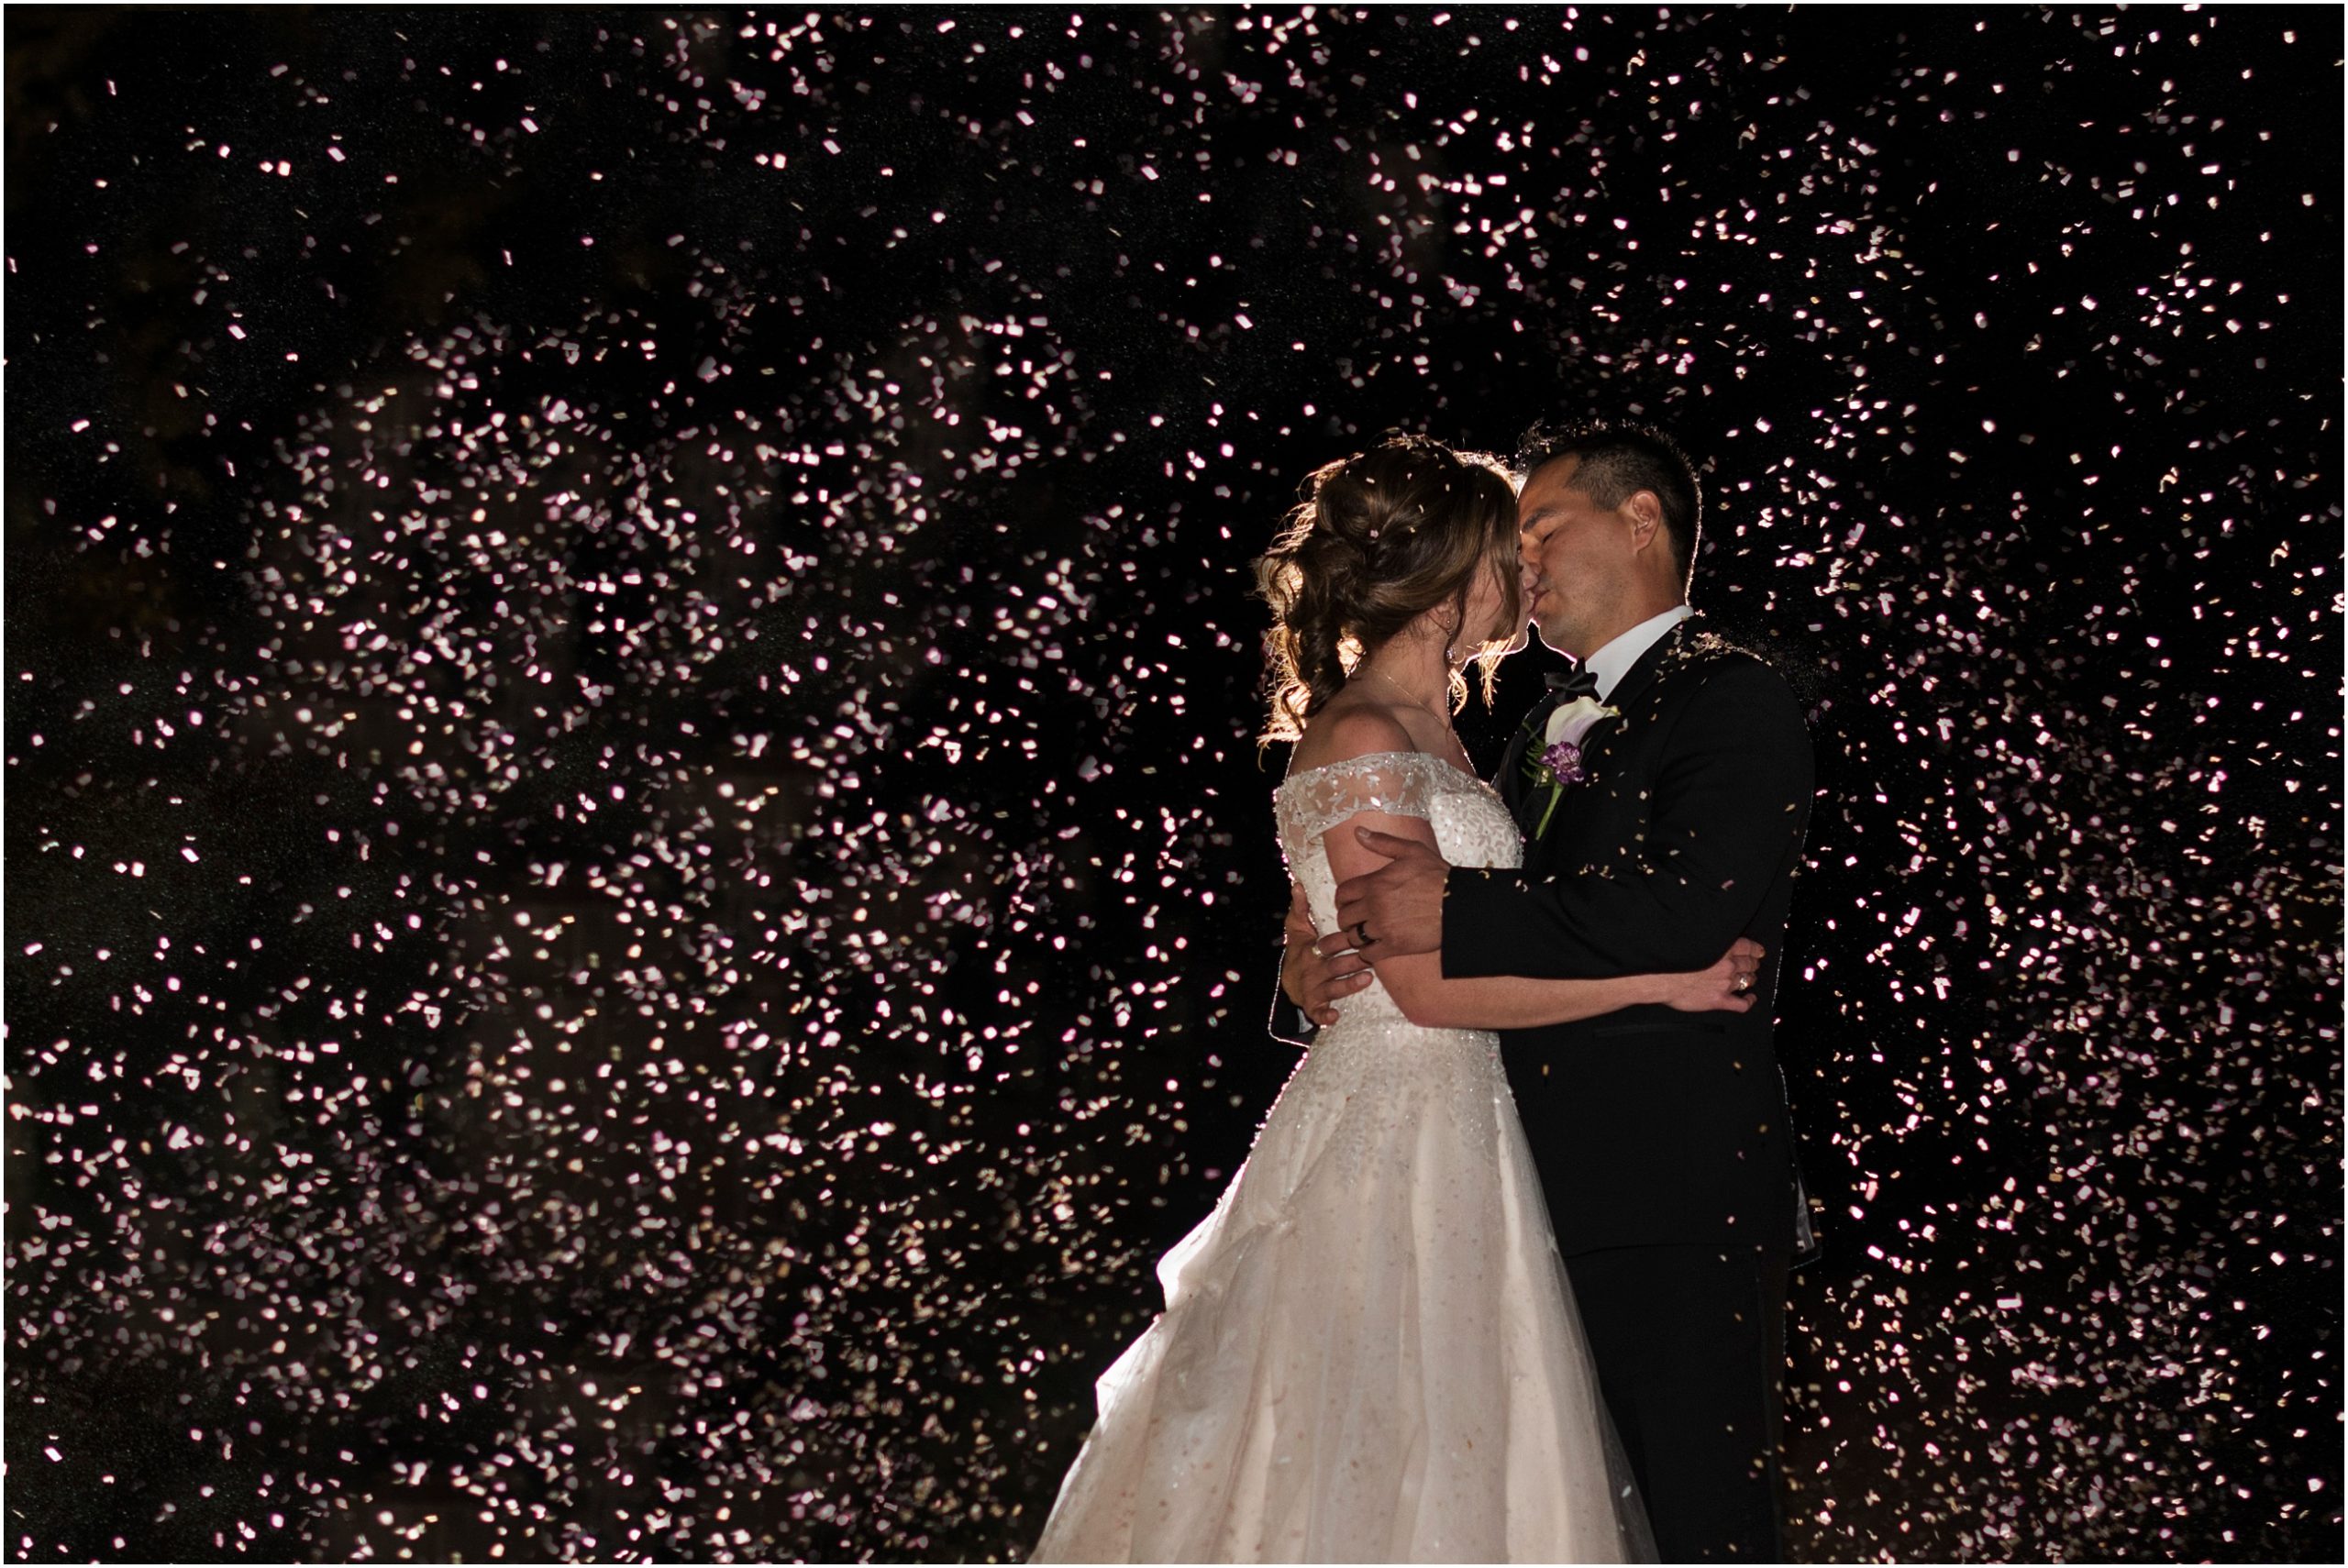 A wedding couple kisses passionately in front of purple confetti behind them on their wedding night